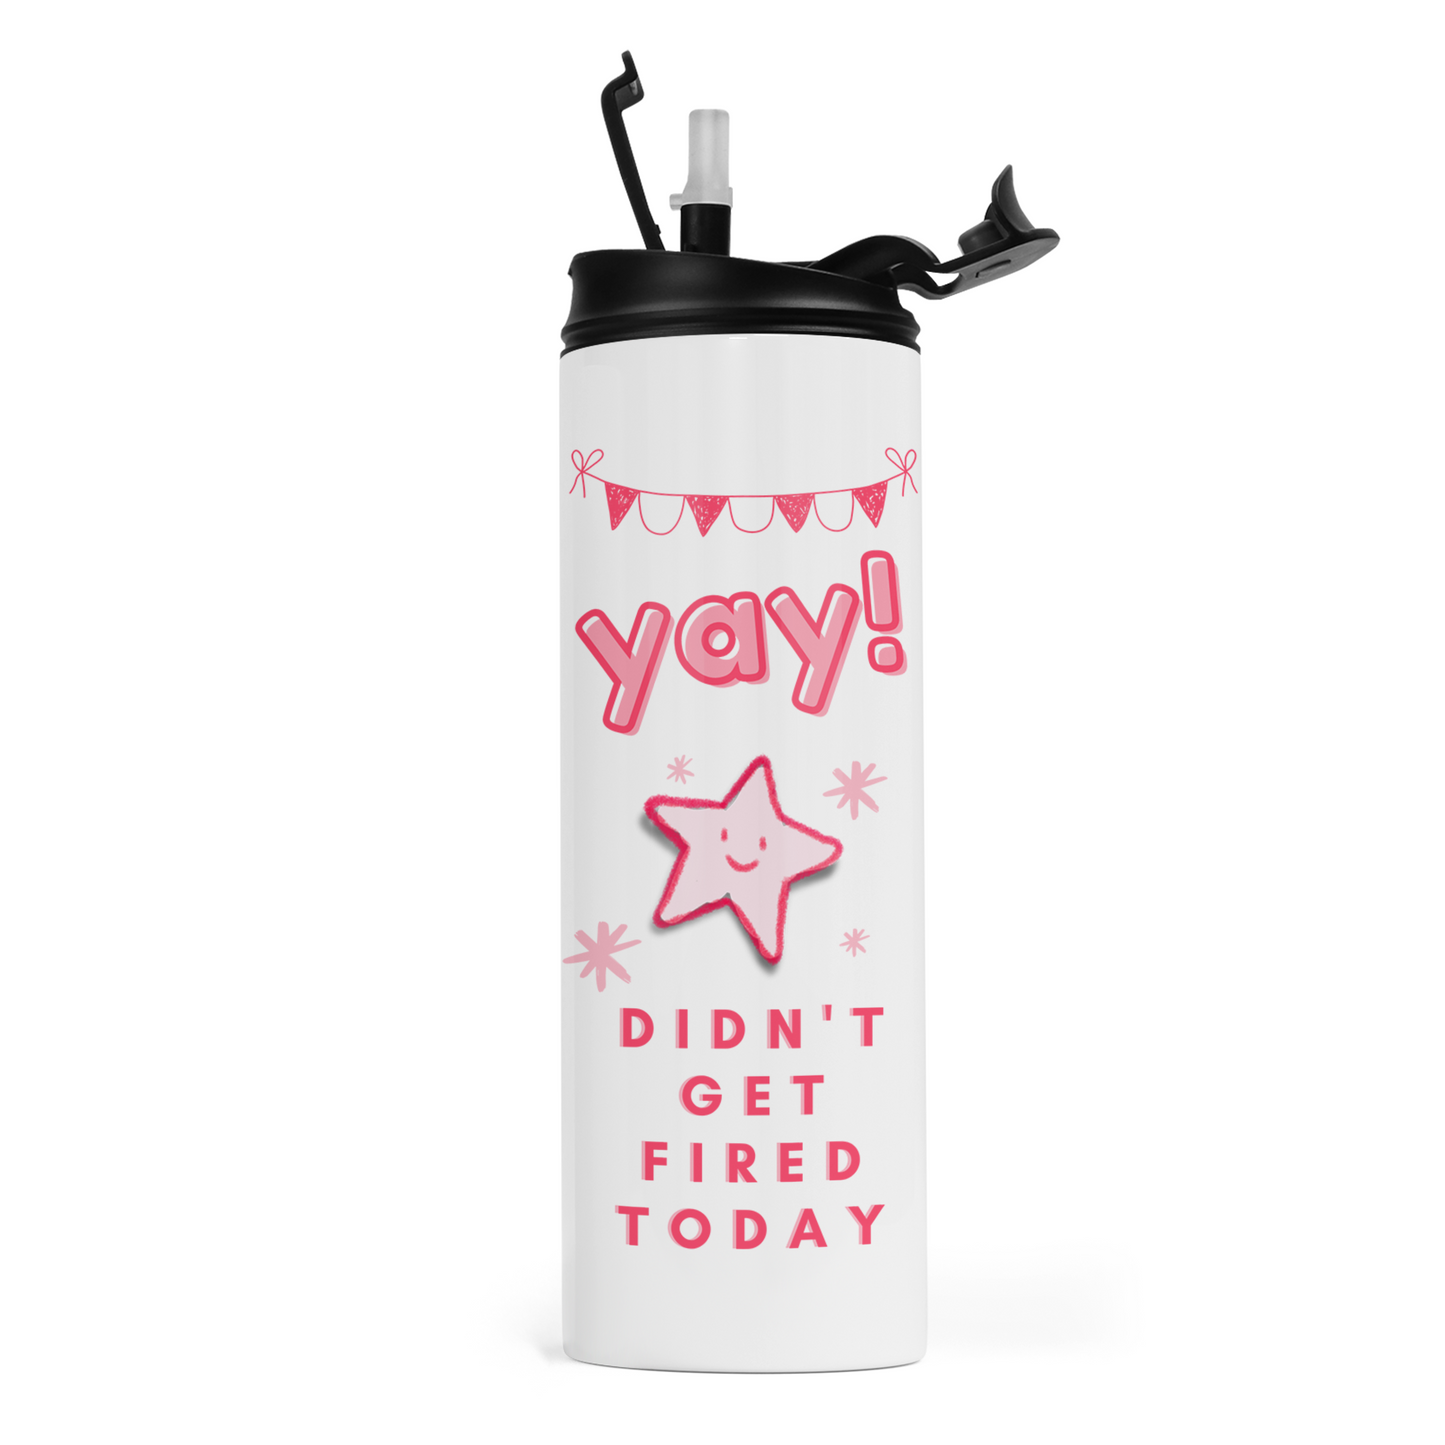 YAY Didn't Get Fired Today Travel Tumbler